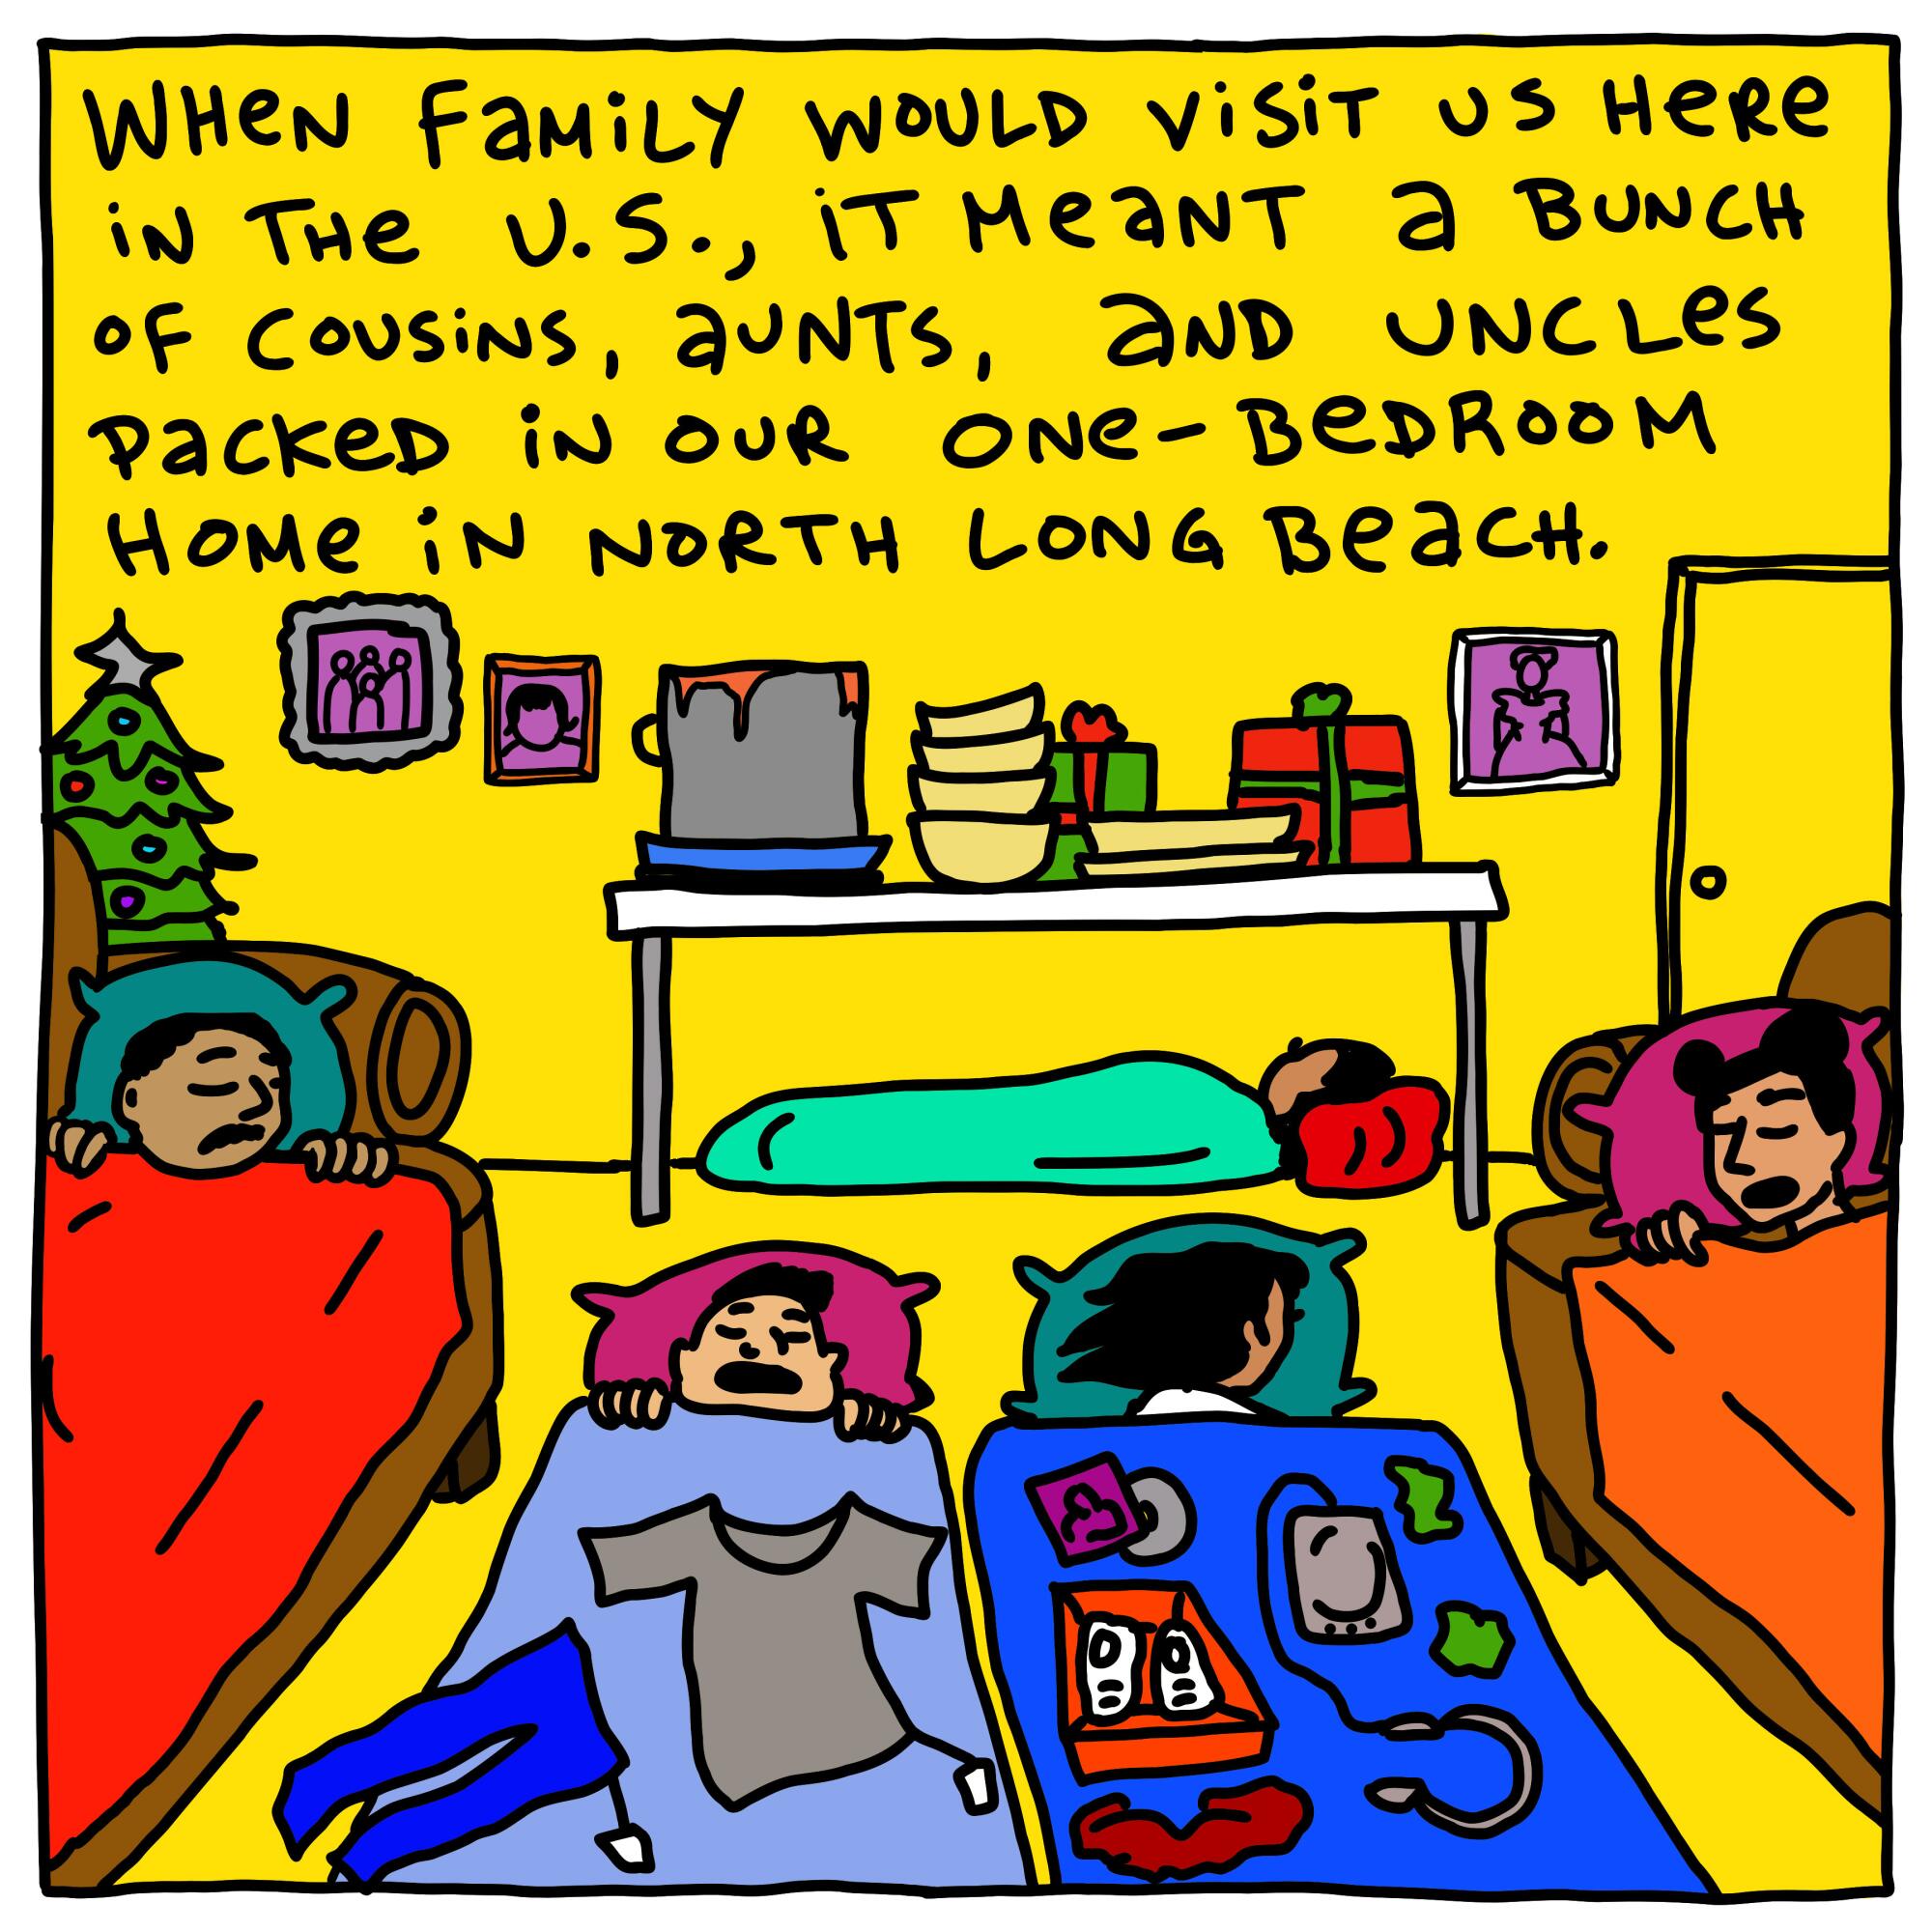 When family would visit us in the U.S., it meant a bunch of cousins, aunts and uncles packed in our one-bedroom 